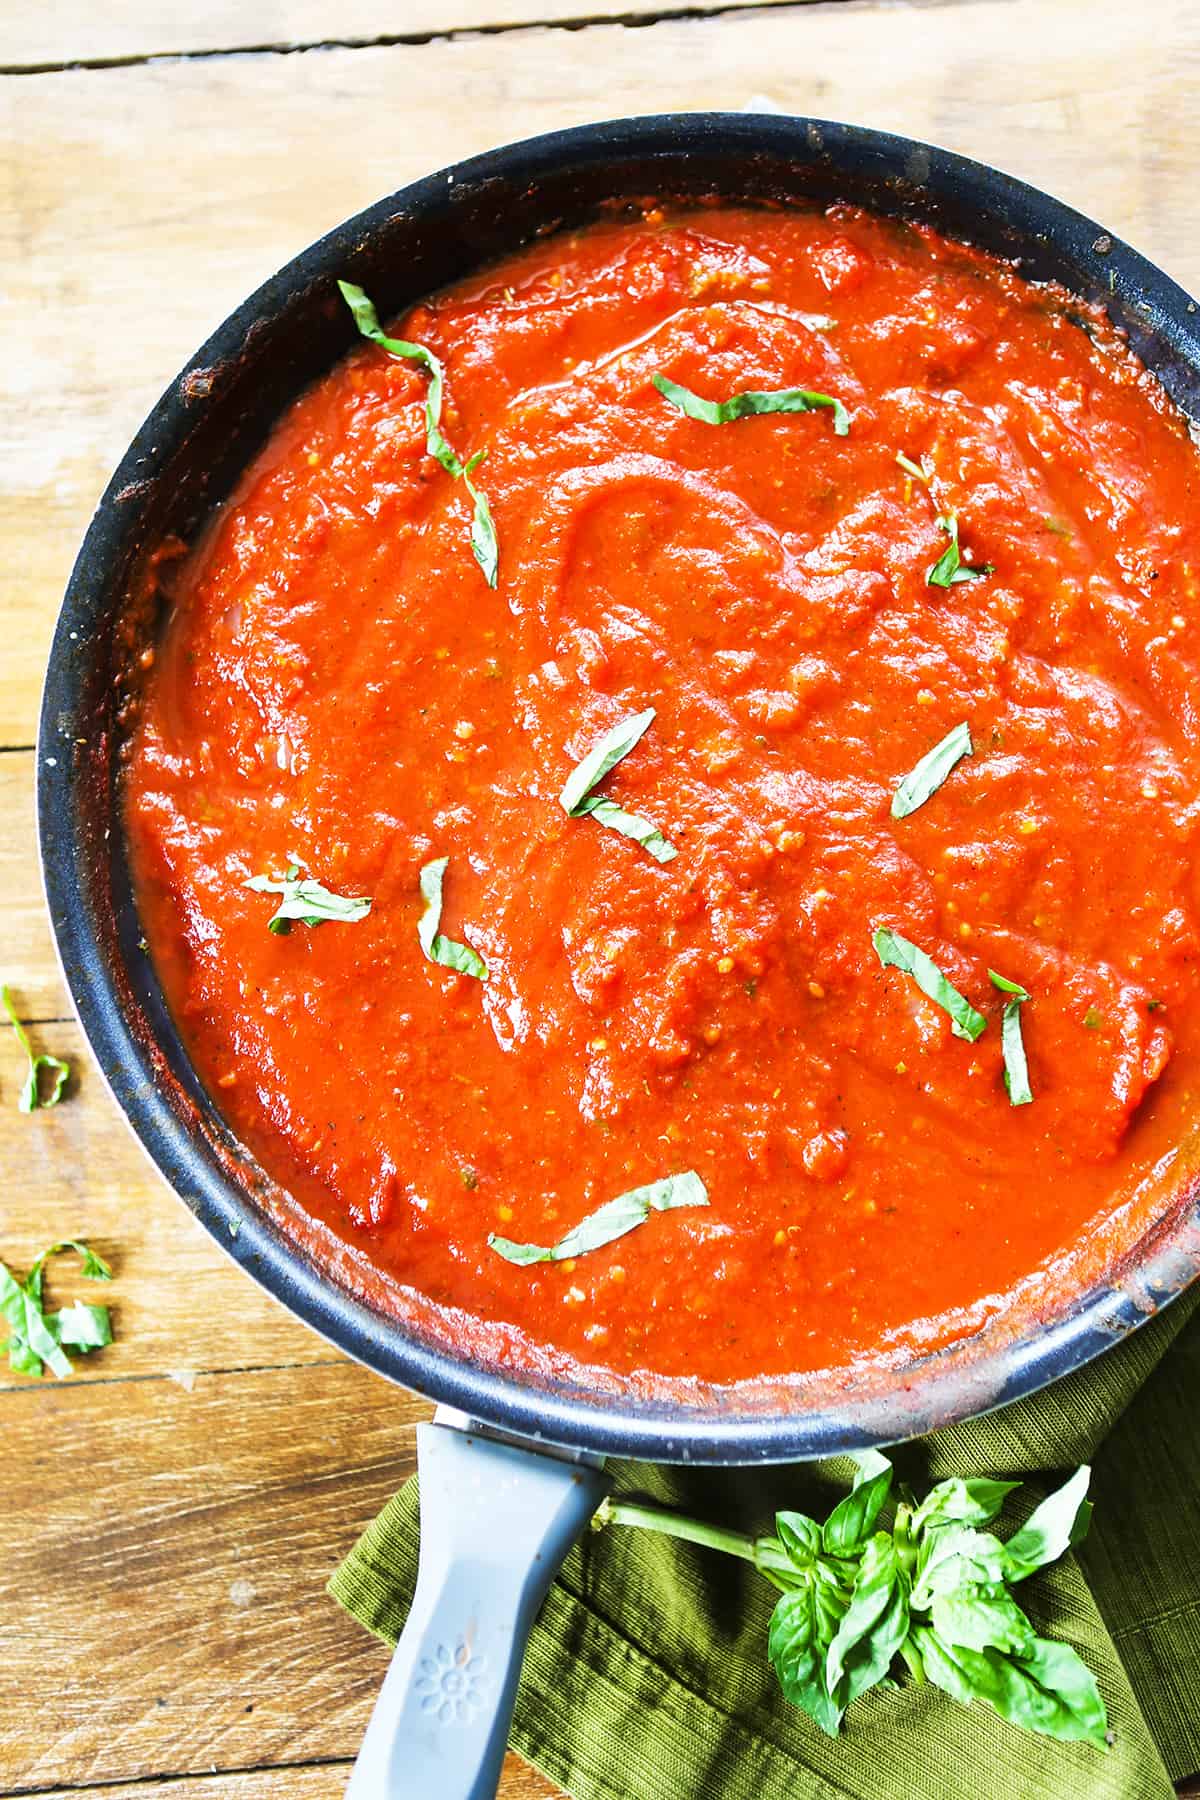 Skillet full of marinara sauce with fresh basil strips over the top.